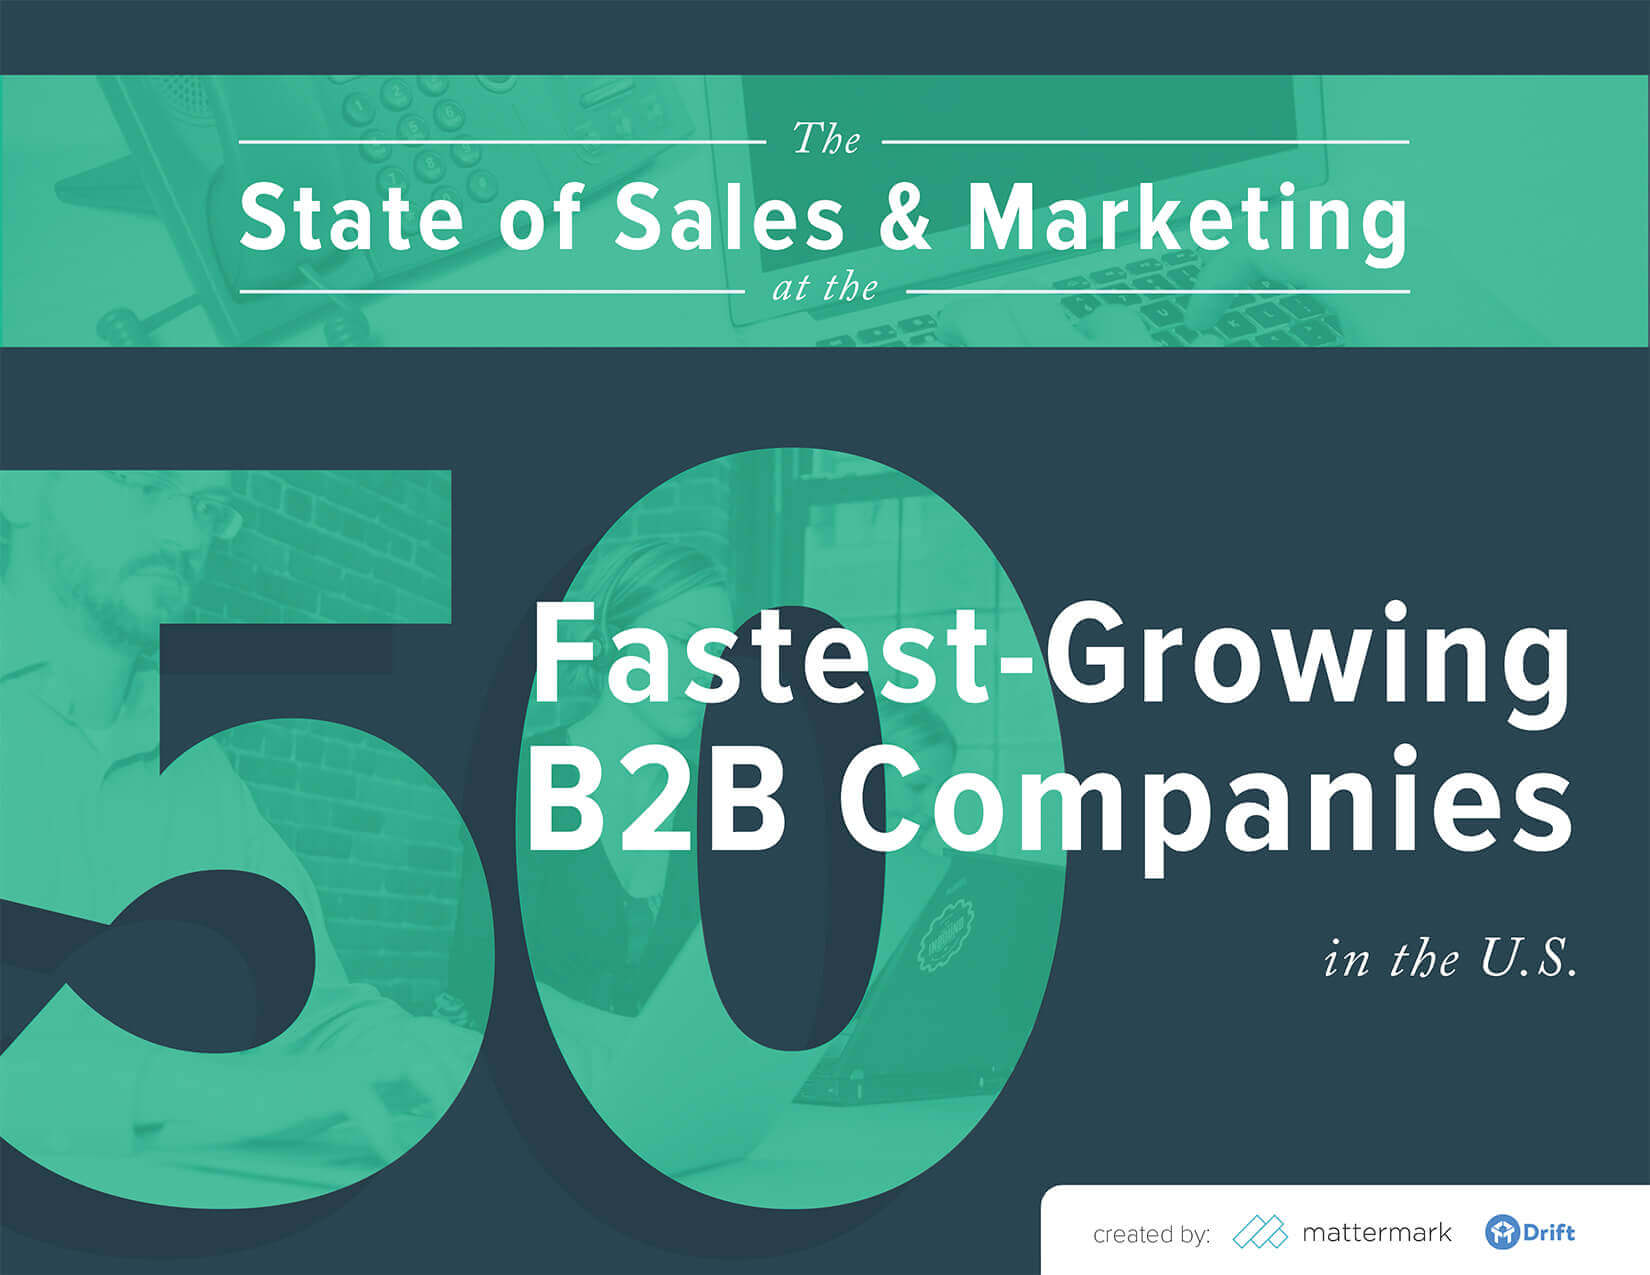 B2B sales and marketing trends report 2016